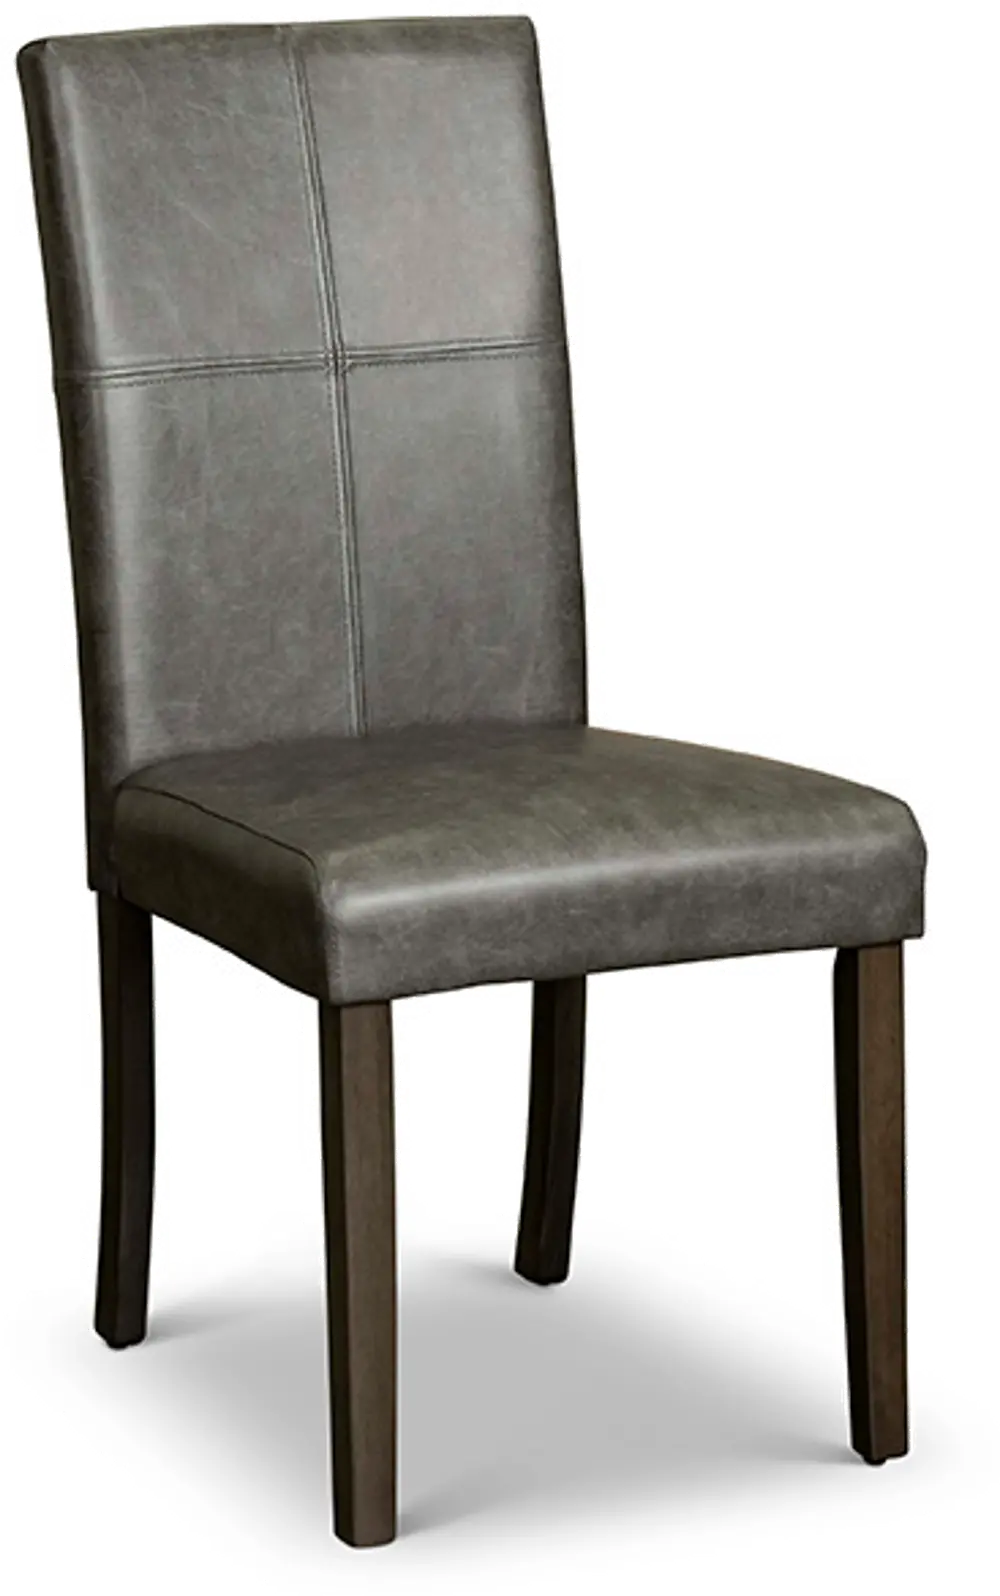 Contemporary Gray Faux Leather Upholstered Dining Room Chair - Pompei-1